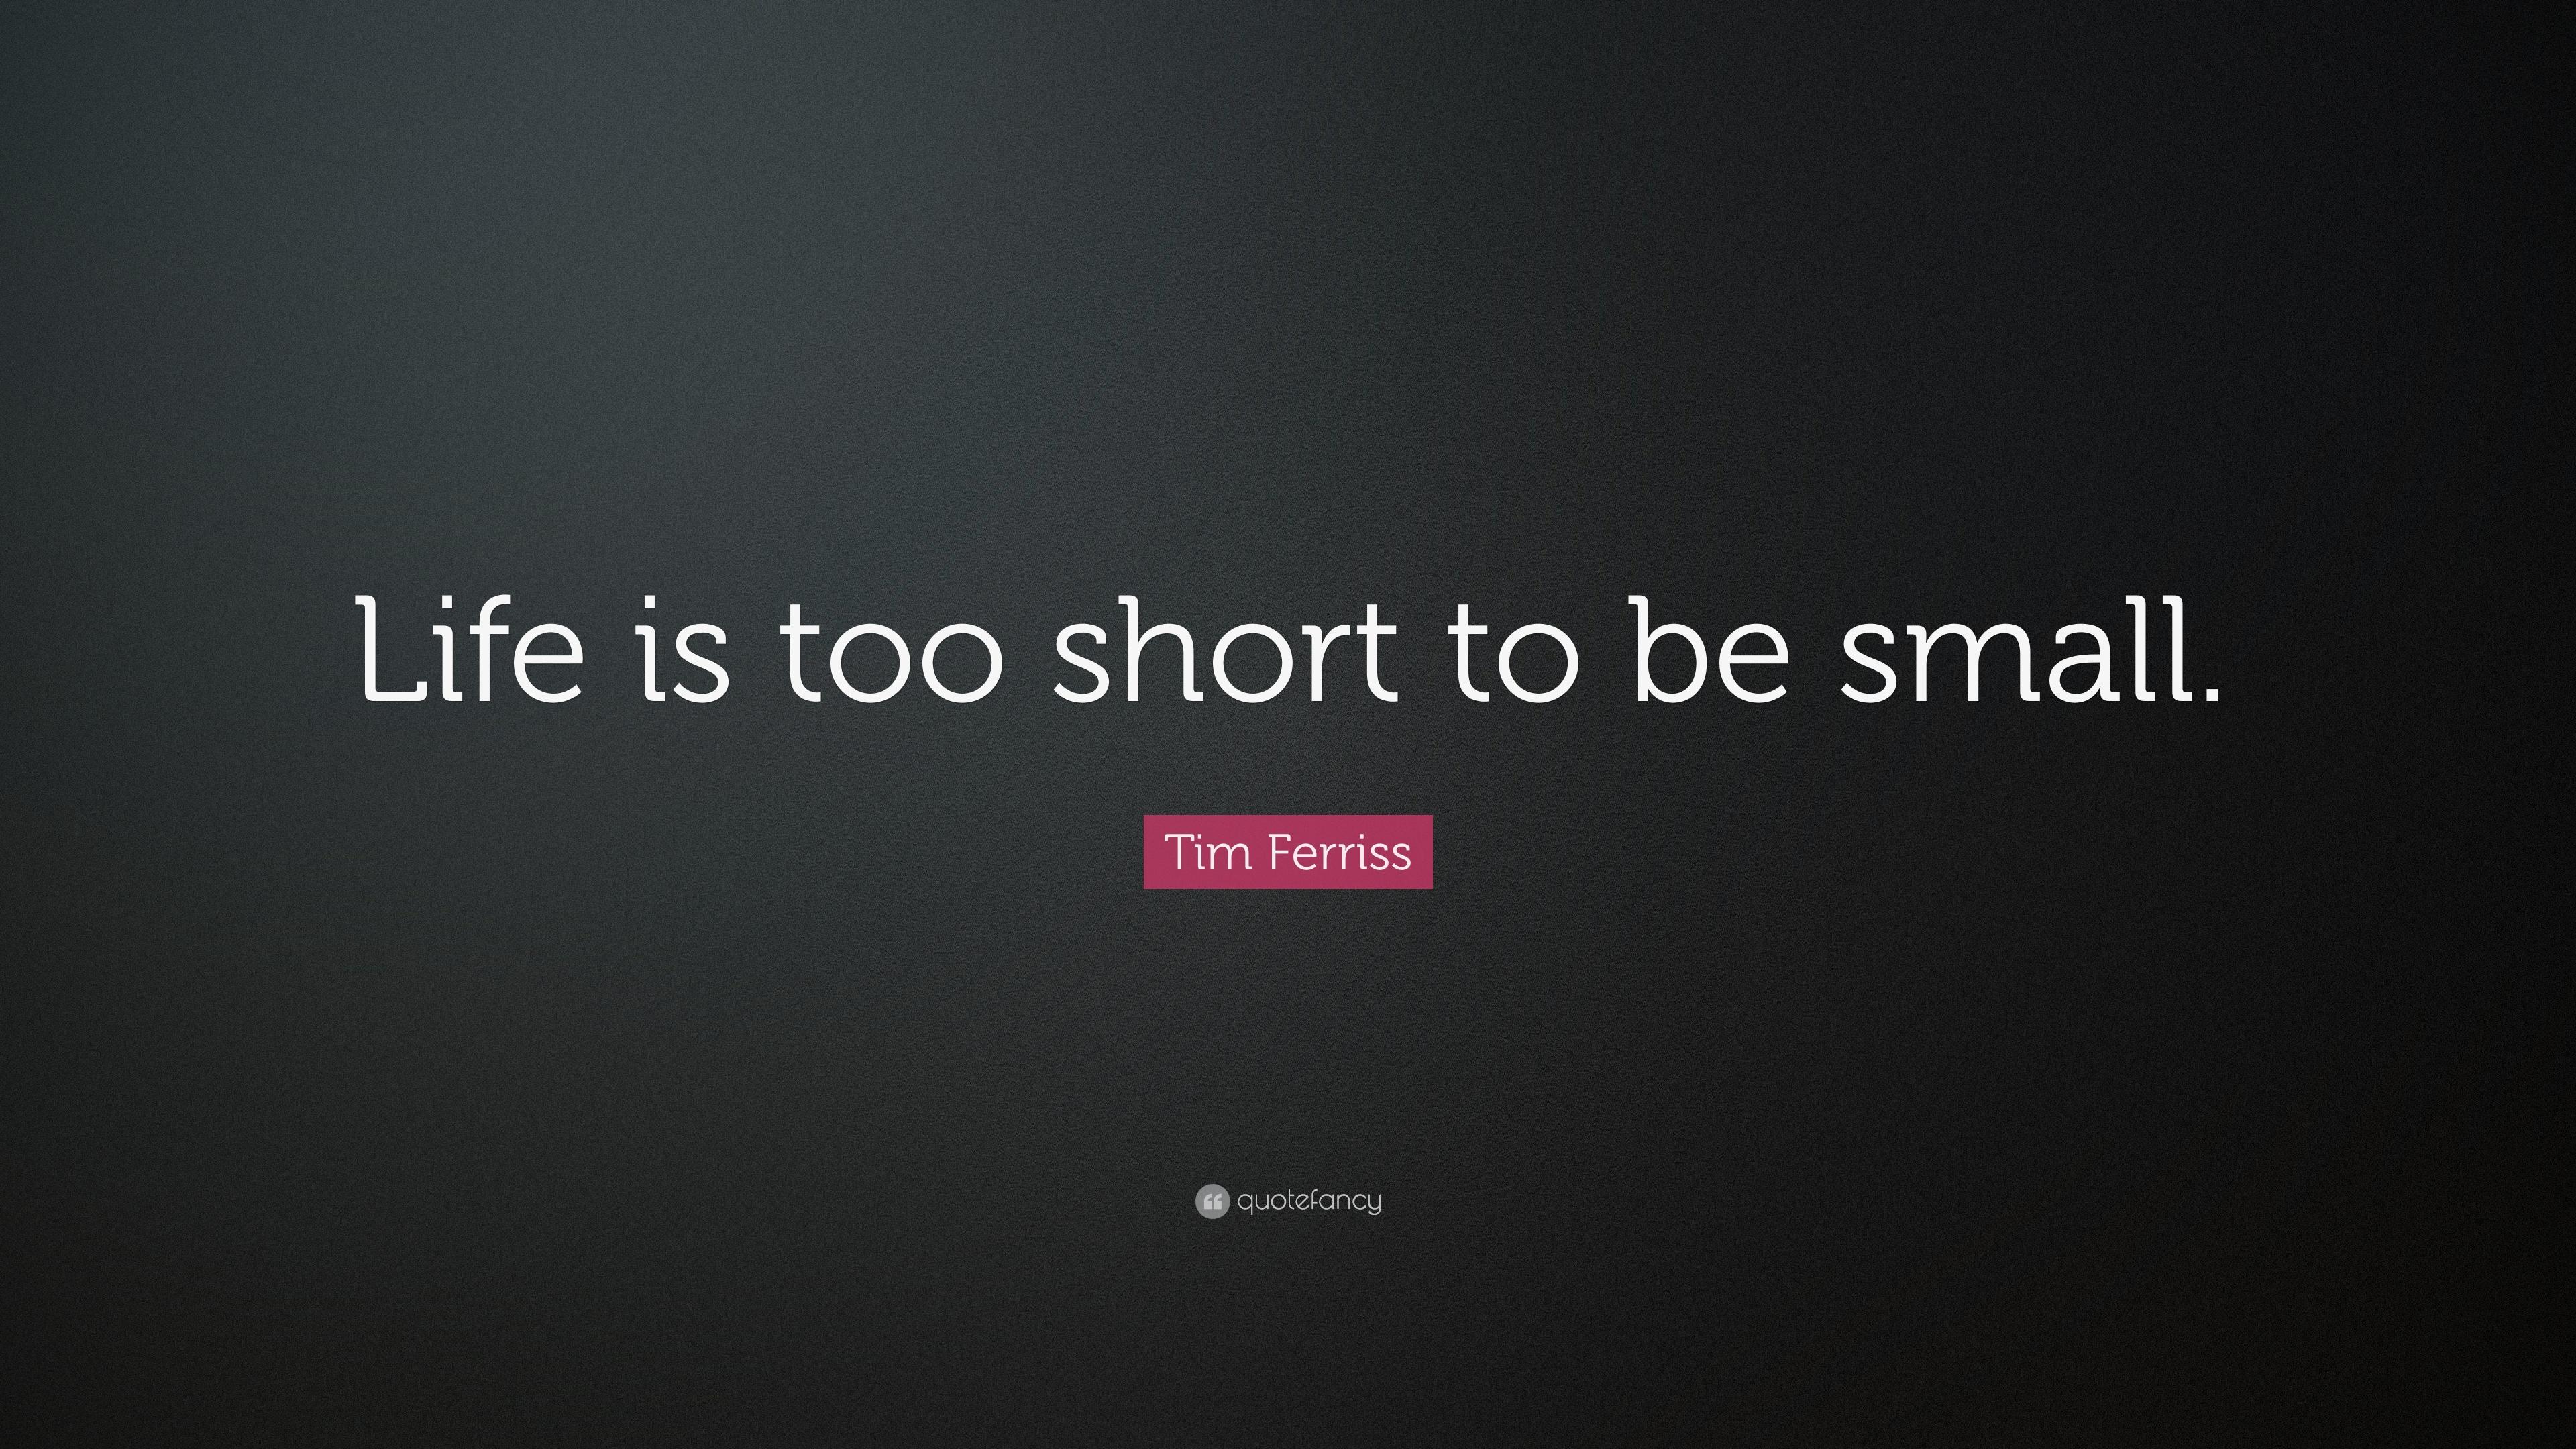 Tim Ferriss Quote: “Life is too short to be small.” 23